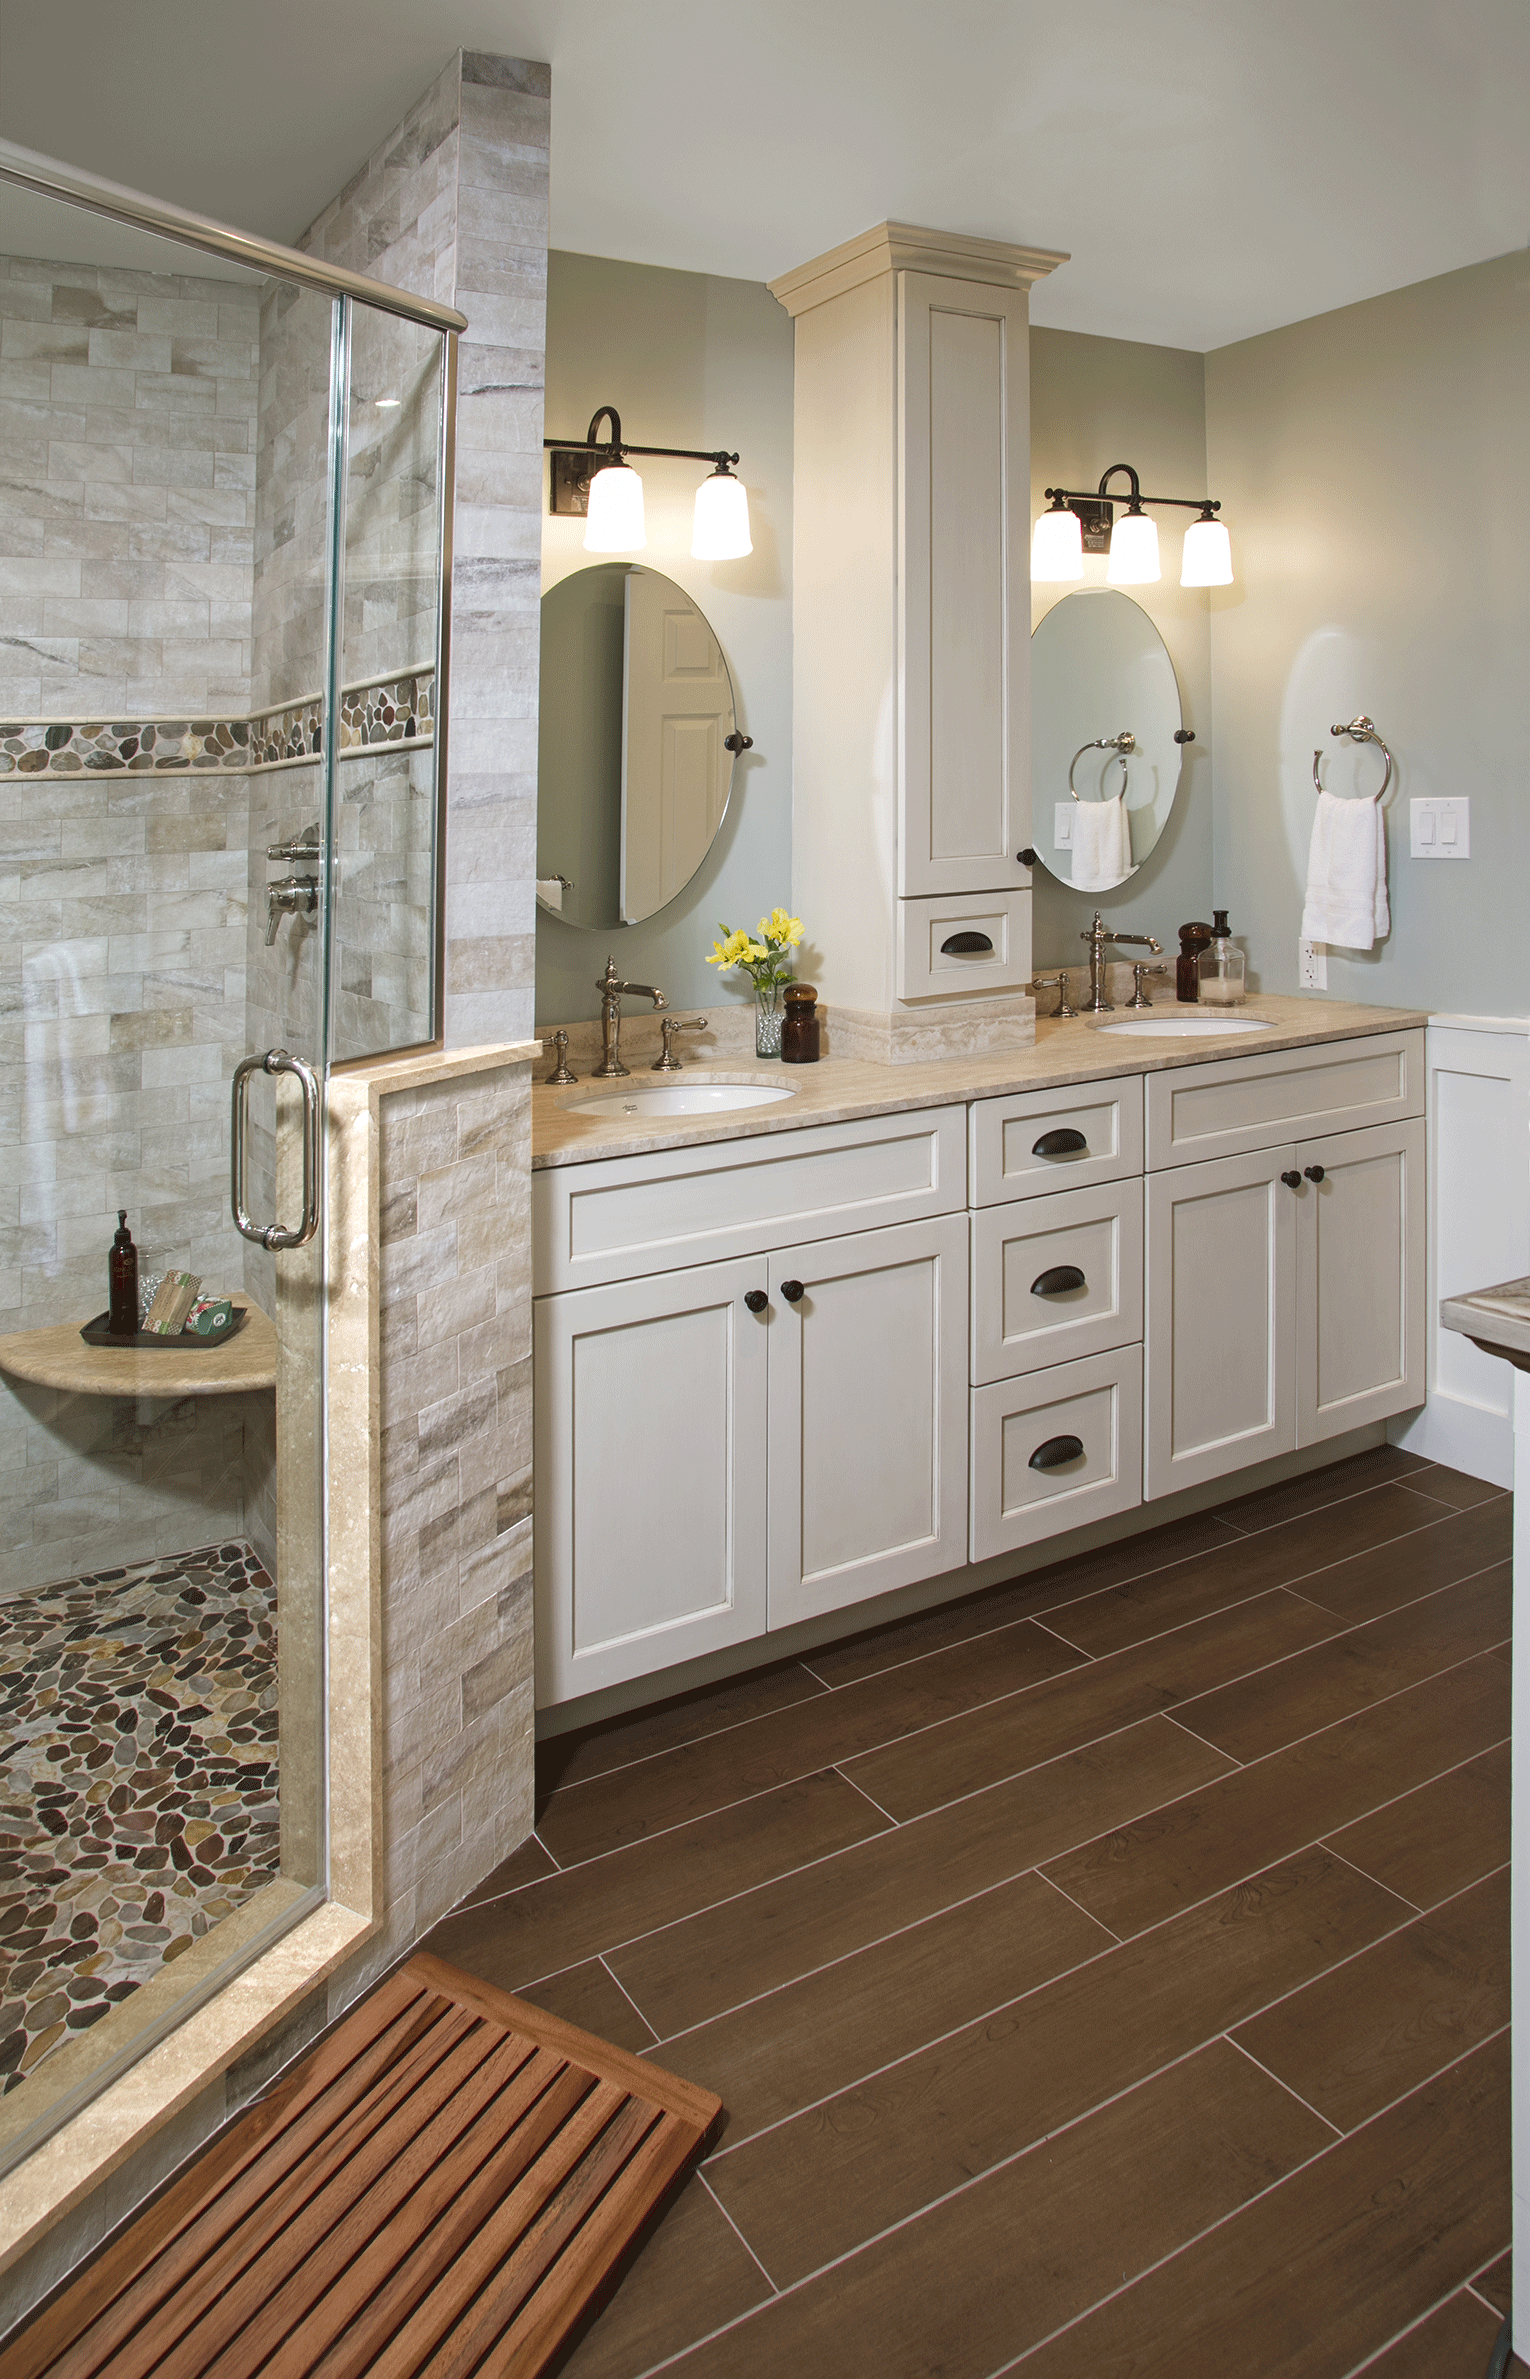 Traditional Bathrooms Designs & Remodeling | HTRenovations